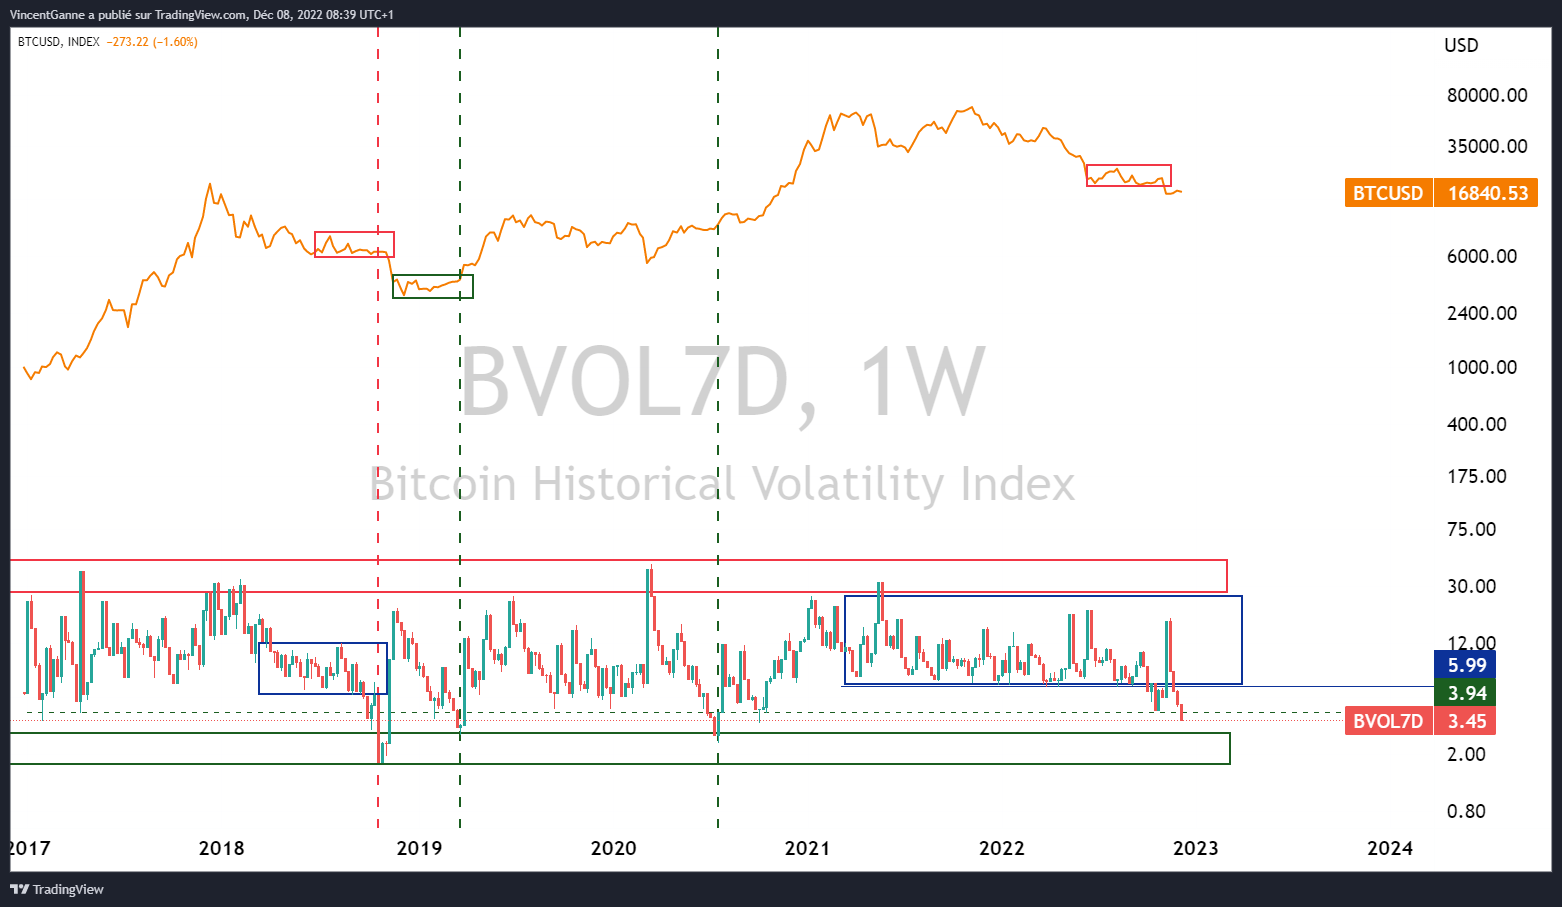 Chart showing 7-day historical volatility in weekly Bitcoin price data